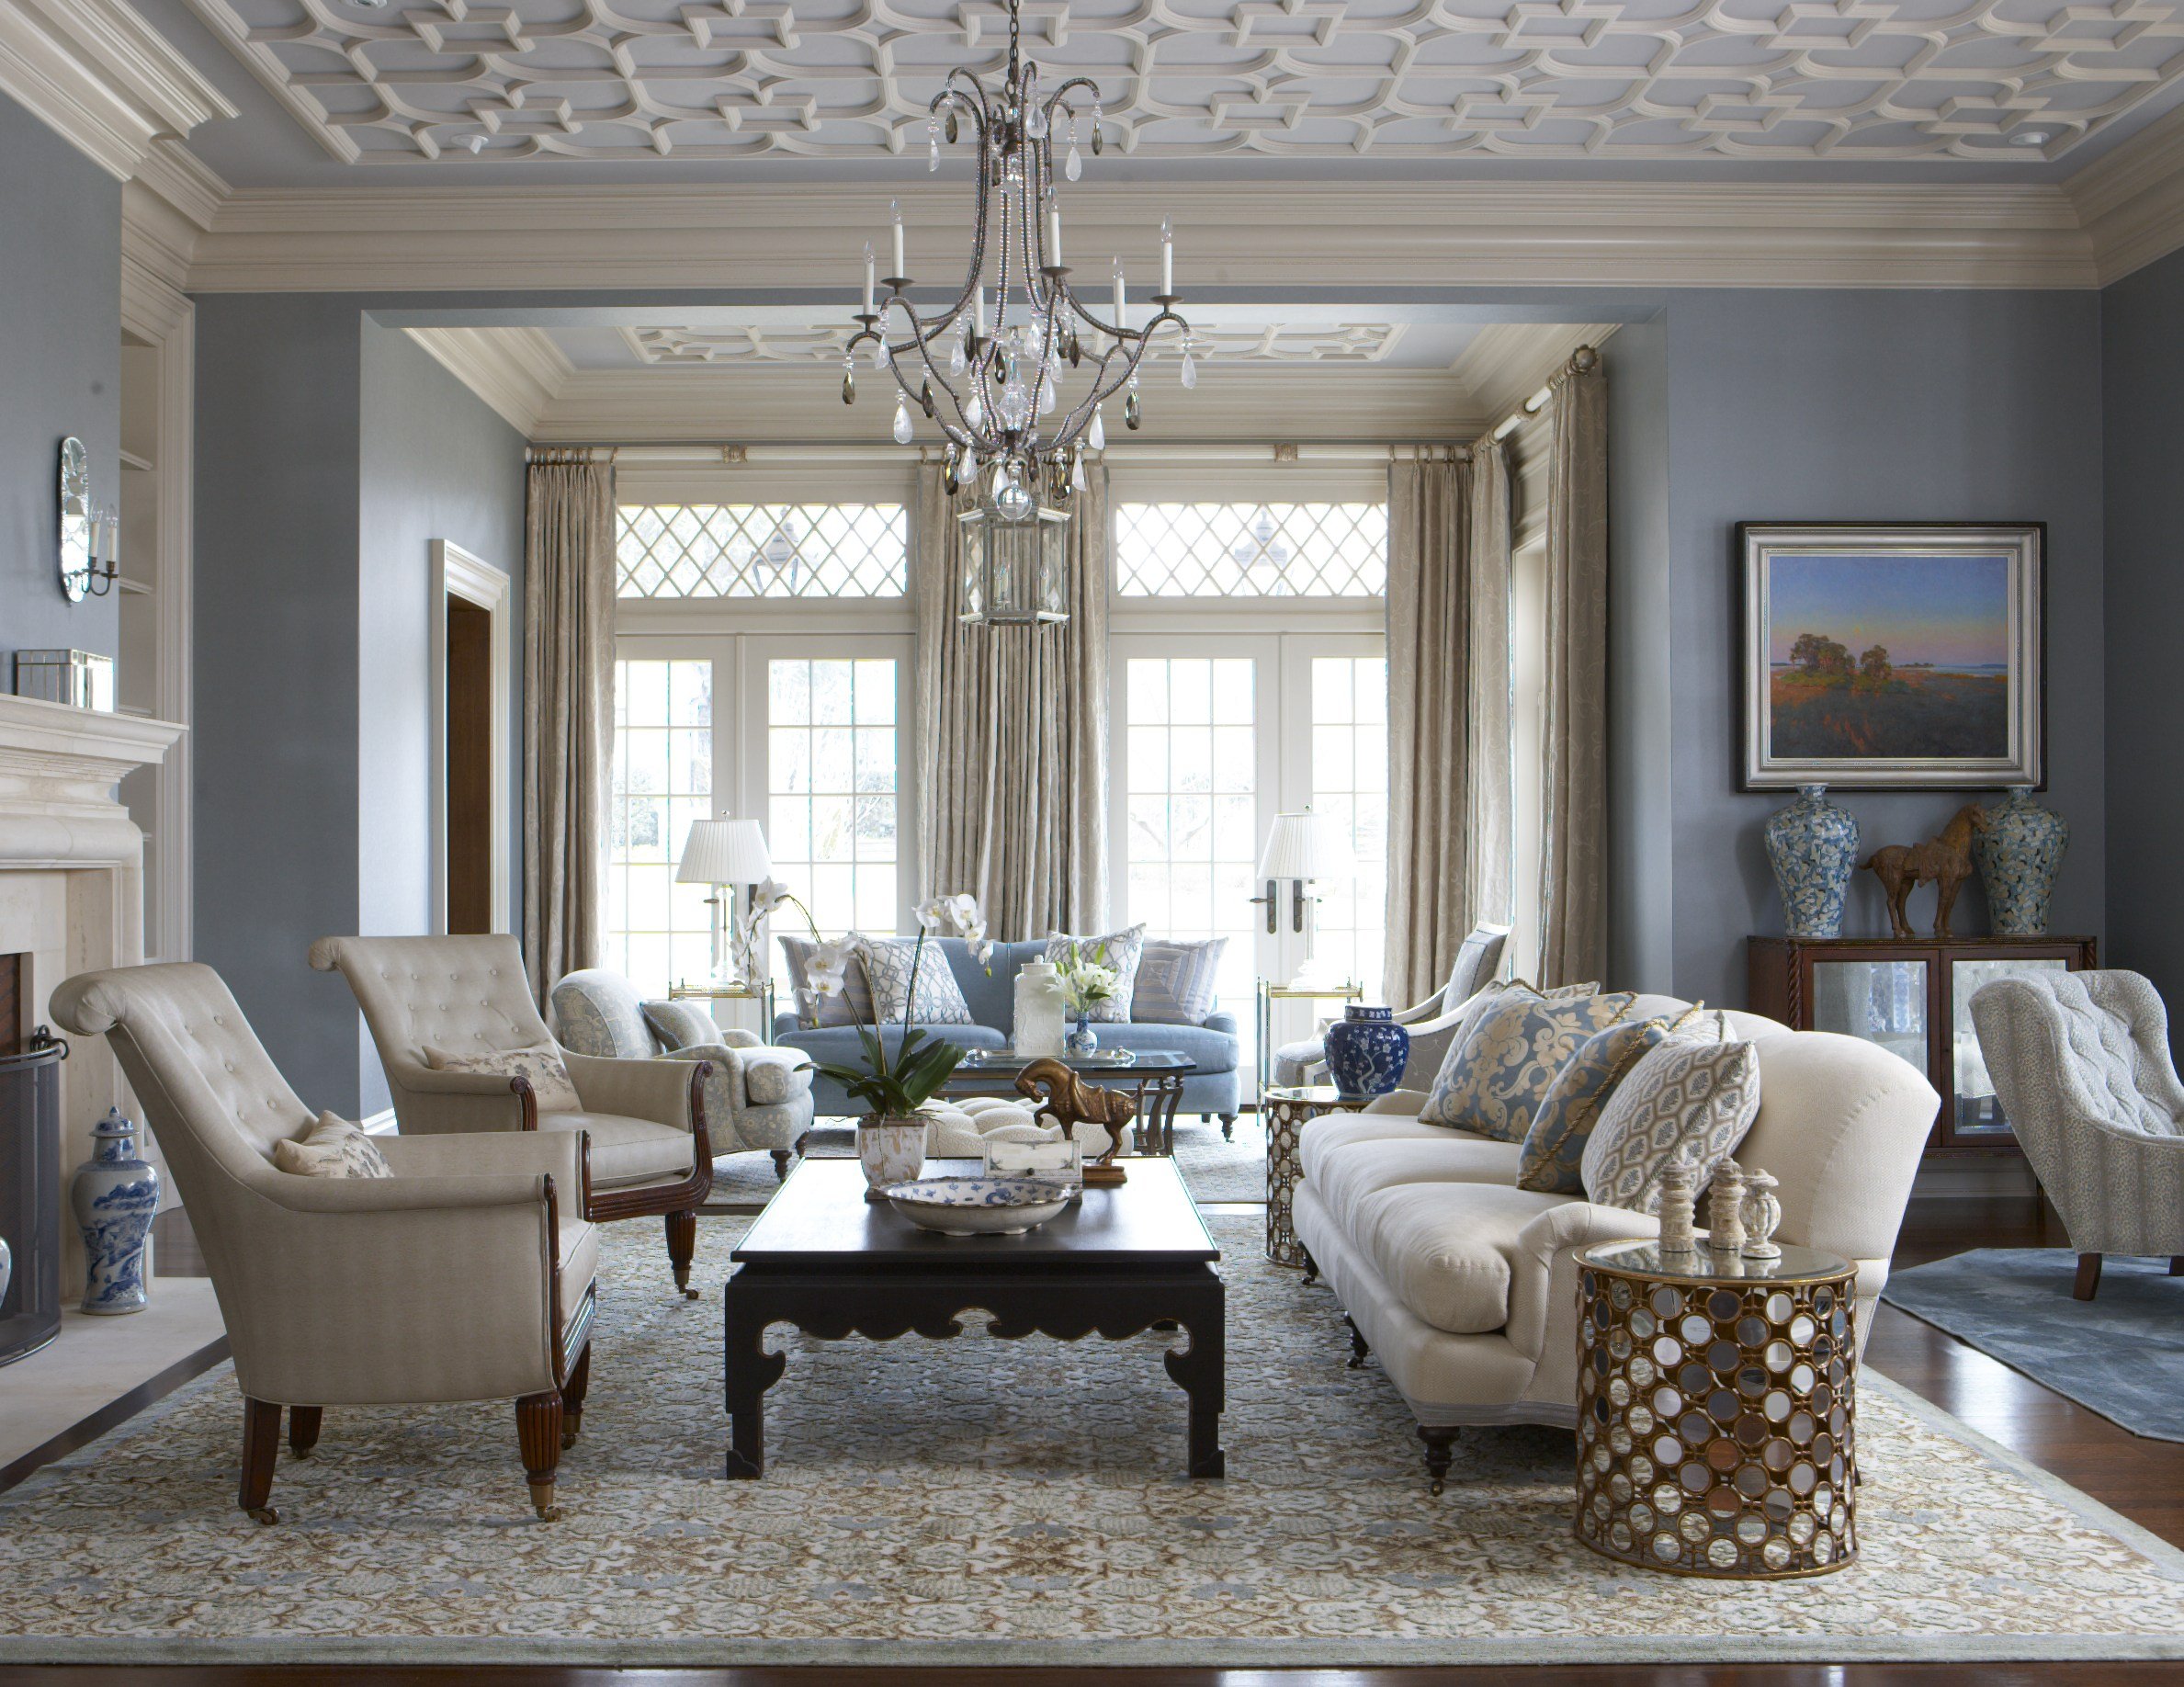 3-jacobean-country-house-living-room-textured-pieces-white-detailed-ceilings-blue-accents-rinfret-interior-designs.jpg